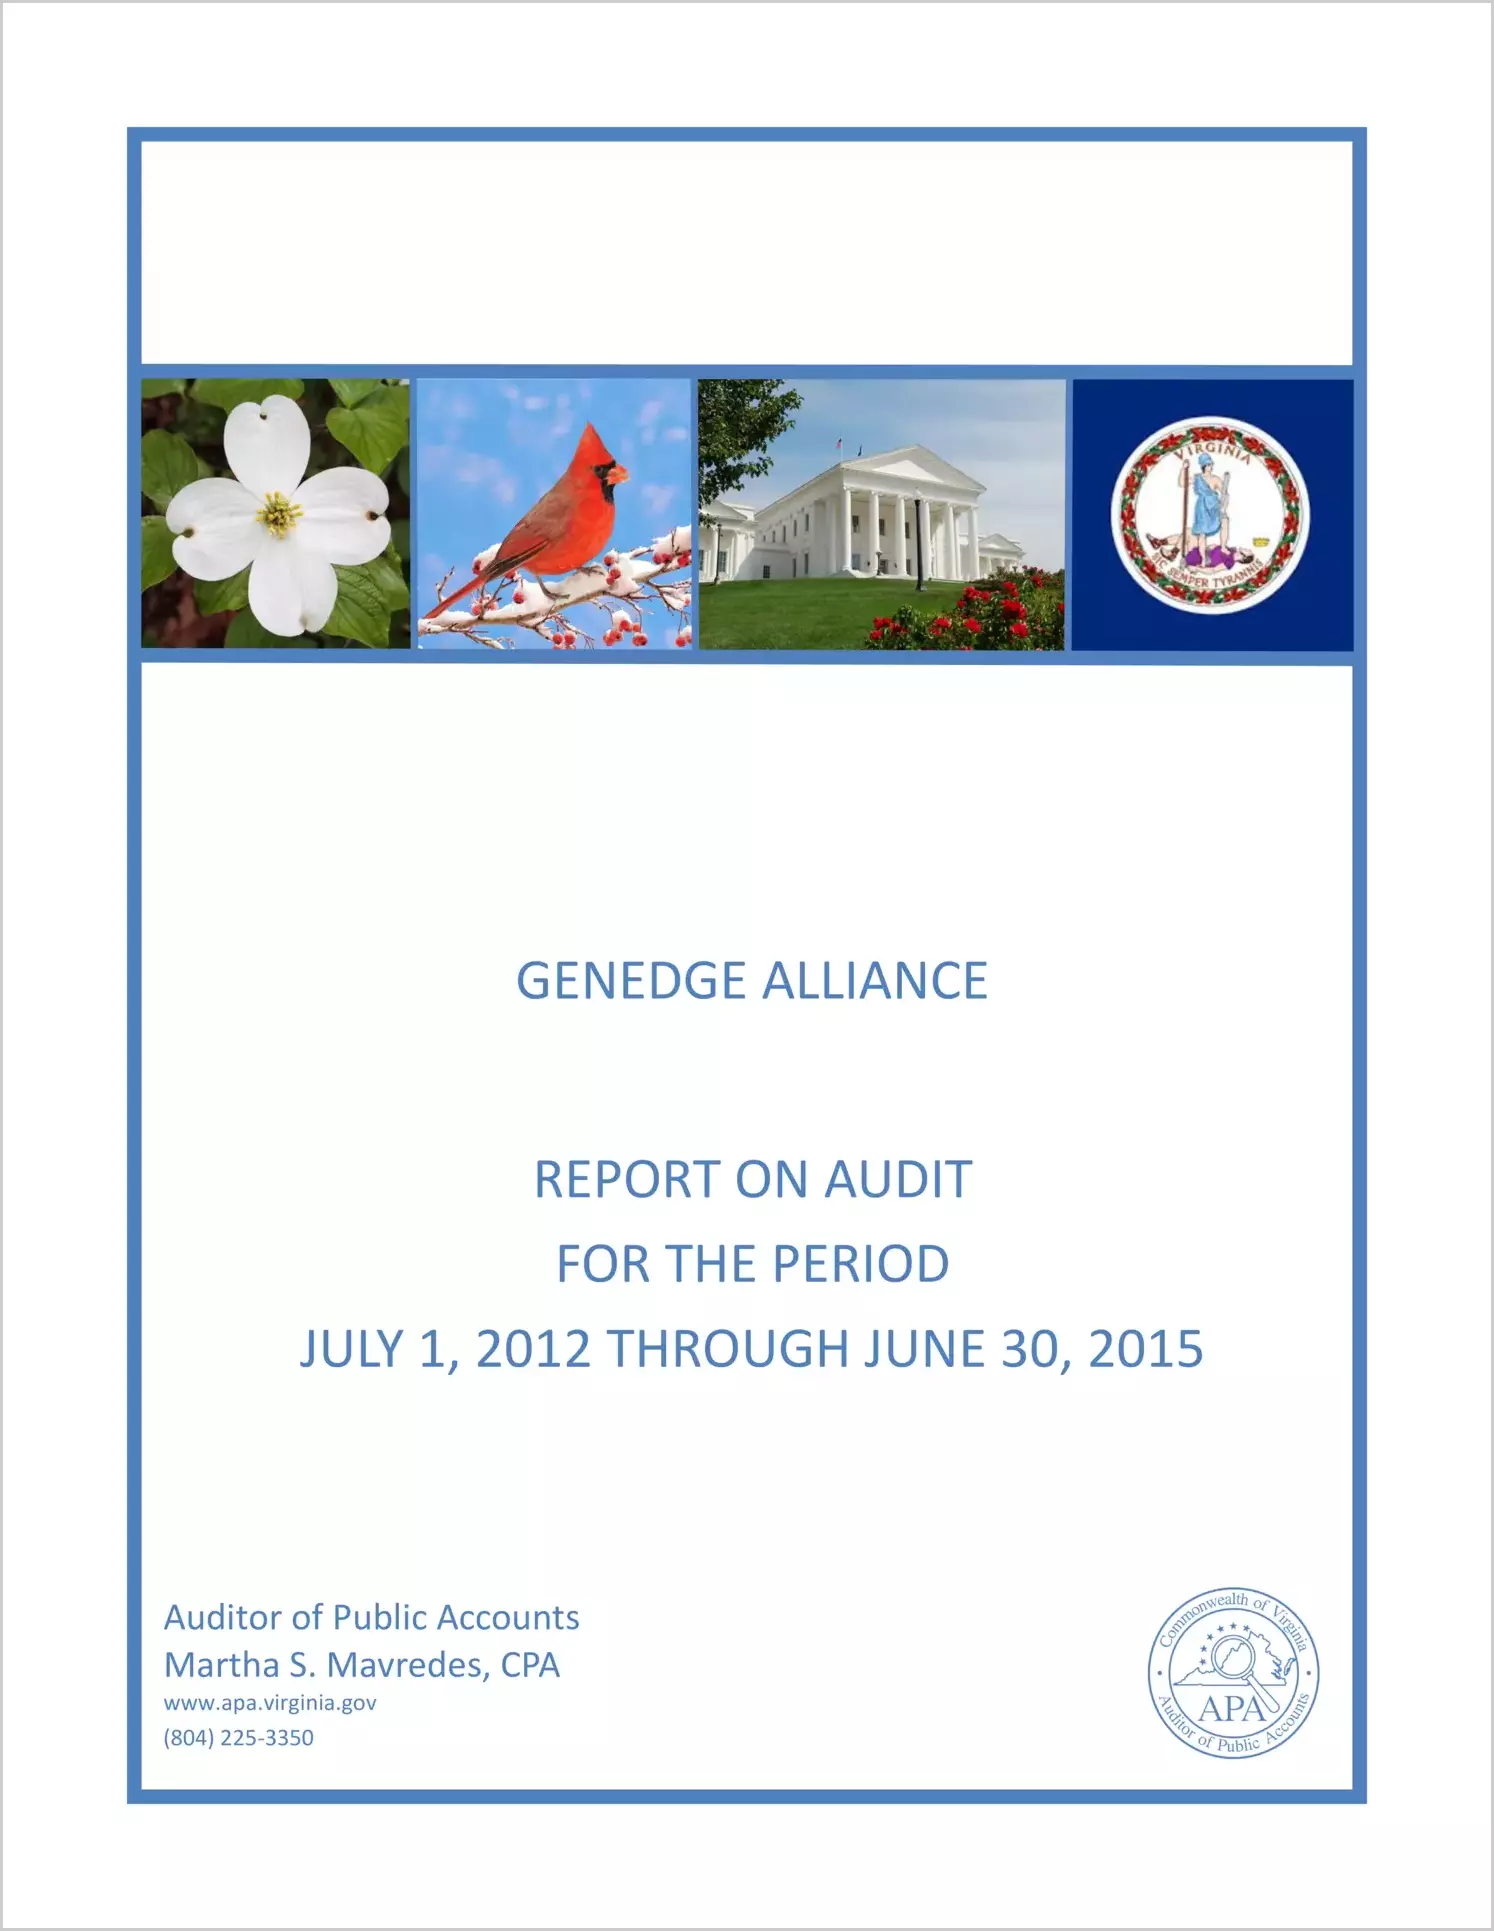 GenEdge Alliance report on audit for the period July 1, 2012 through June 30, 2015